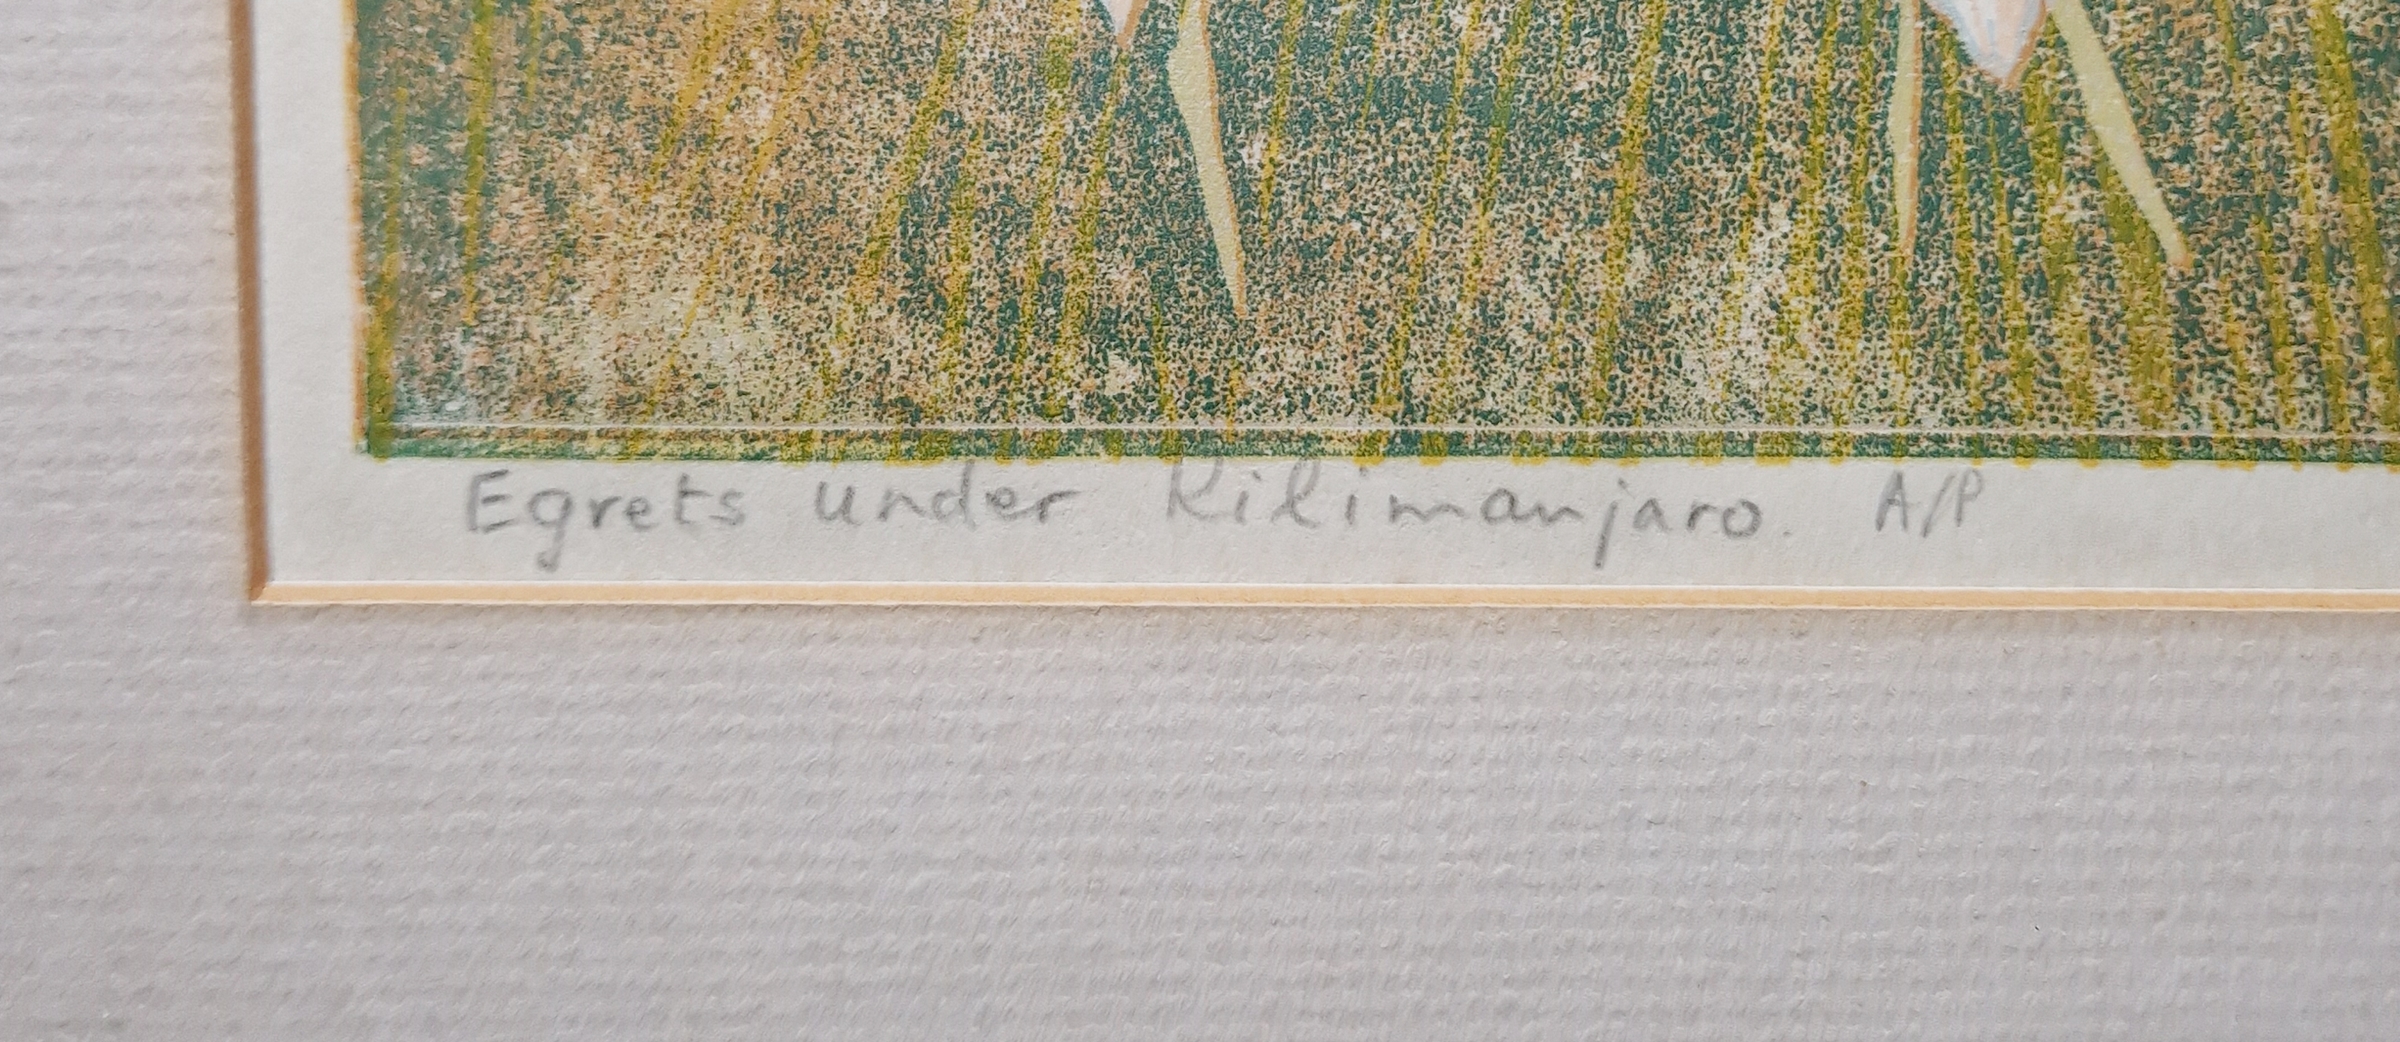 Pauline S Hall (20th/21st century) Colour lithograph 'Egrets Under Kilimanjaro', artist's proof, - Image 4 of 4